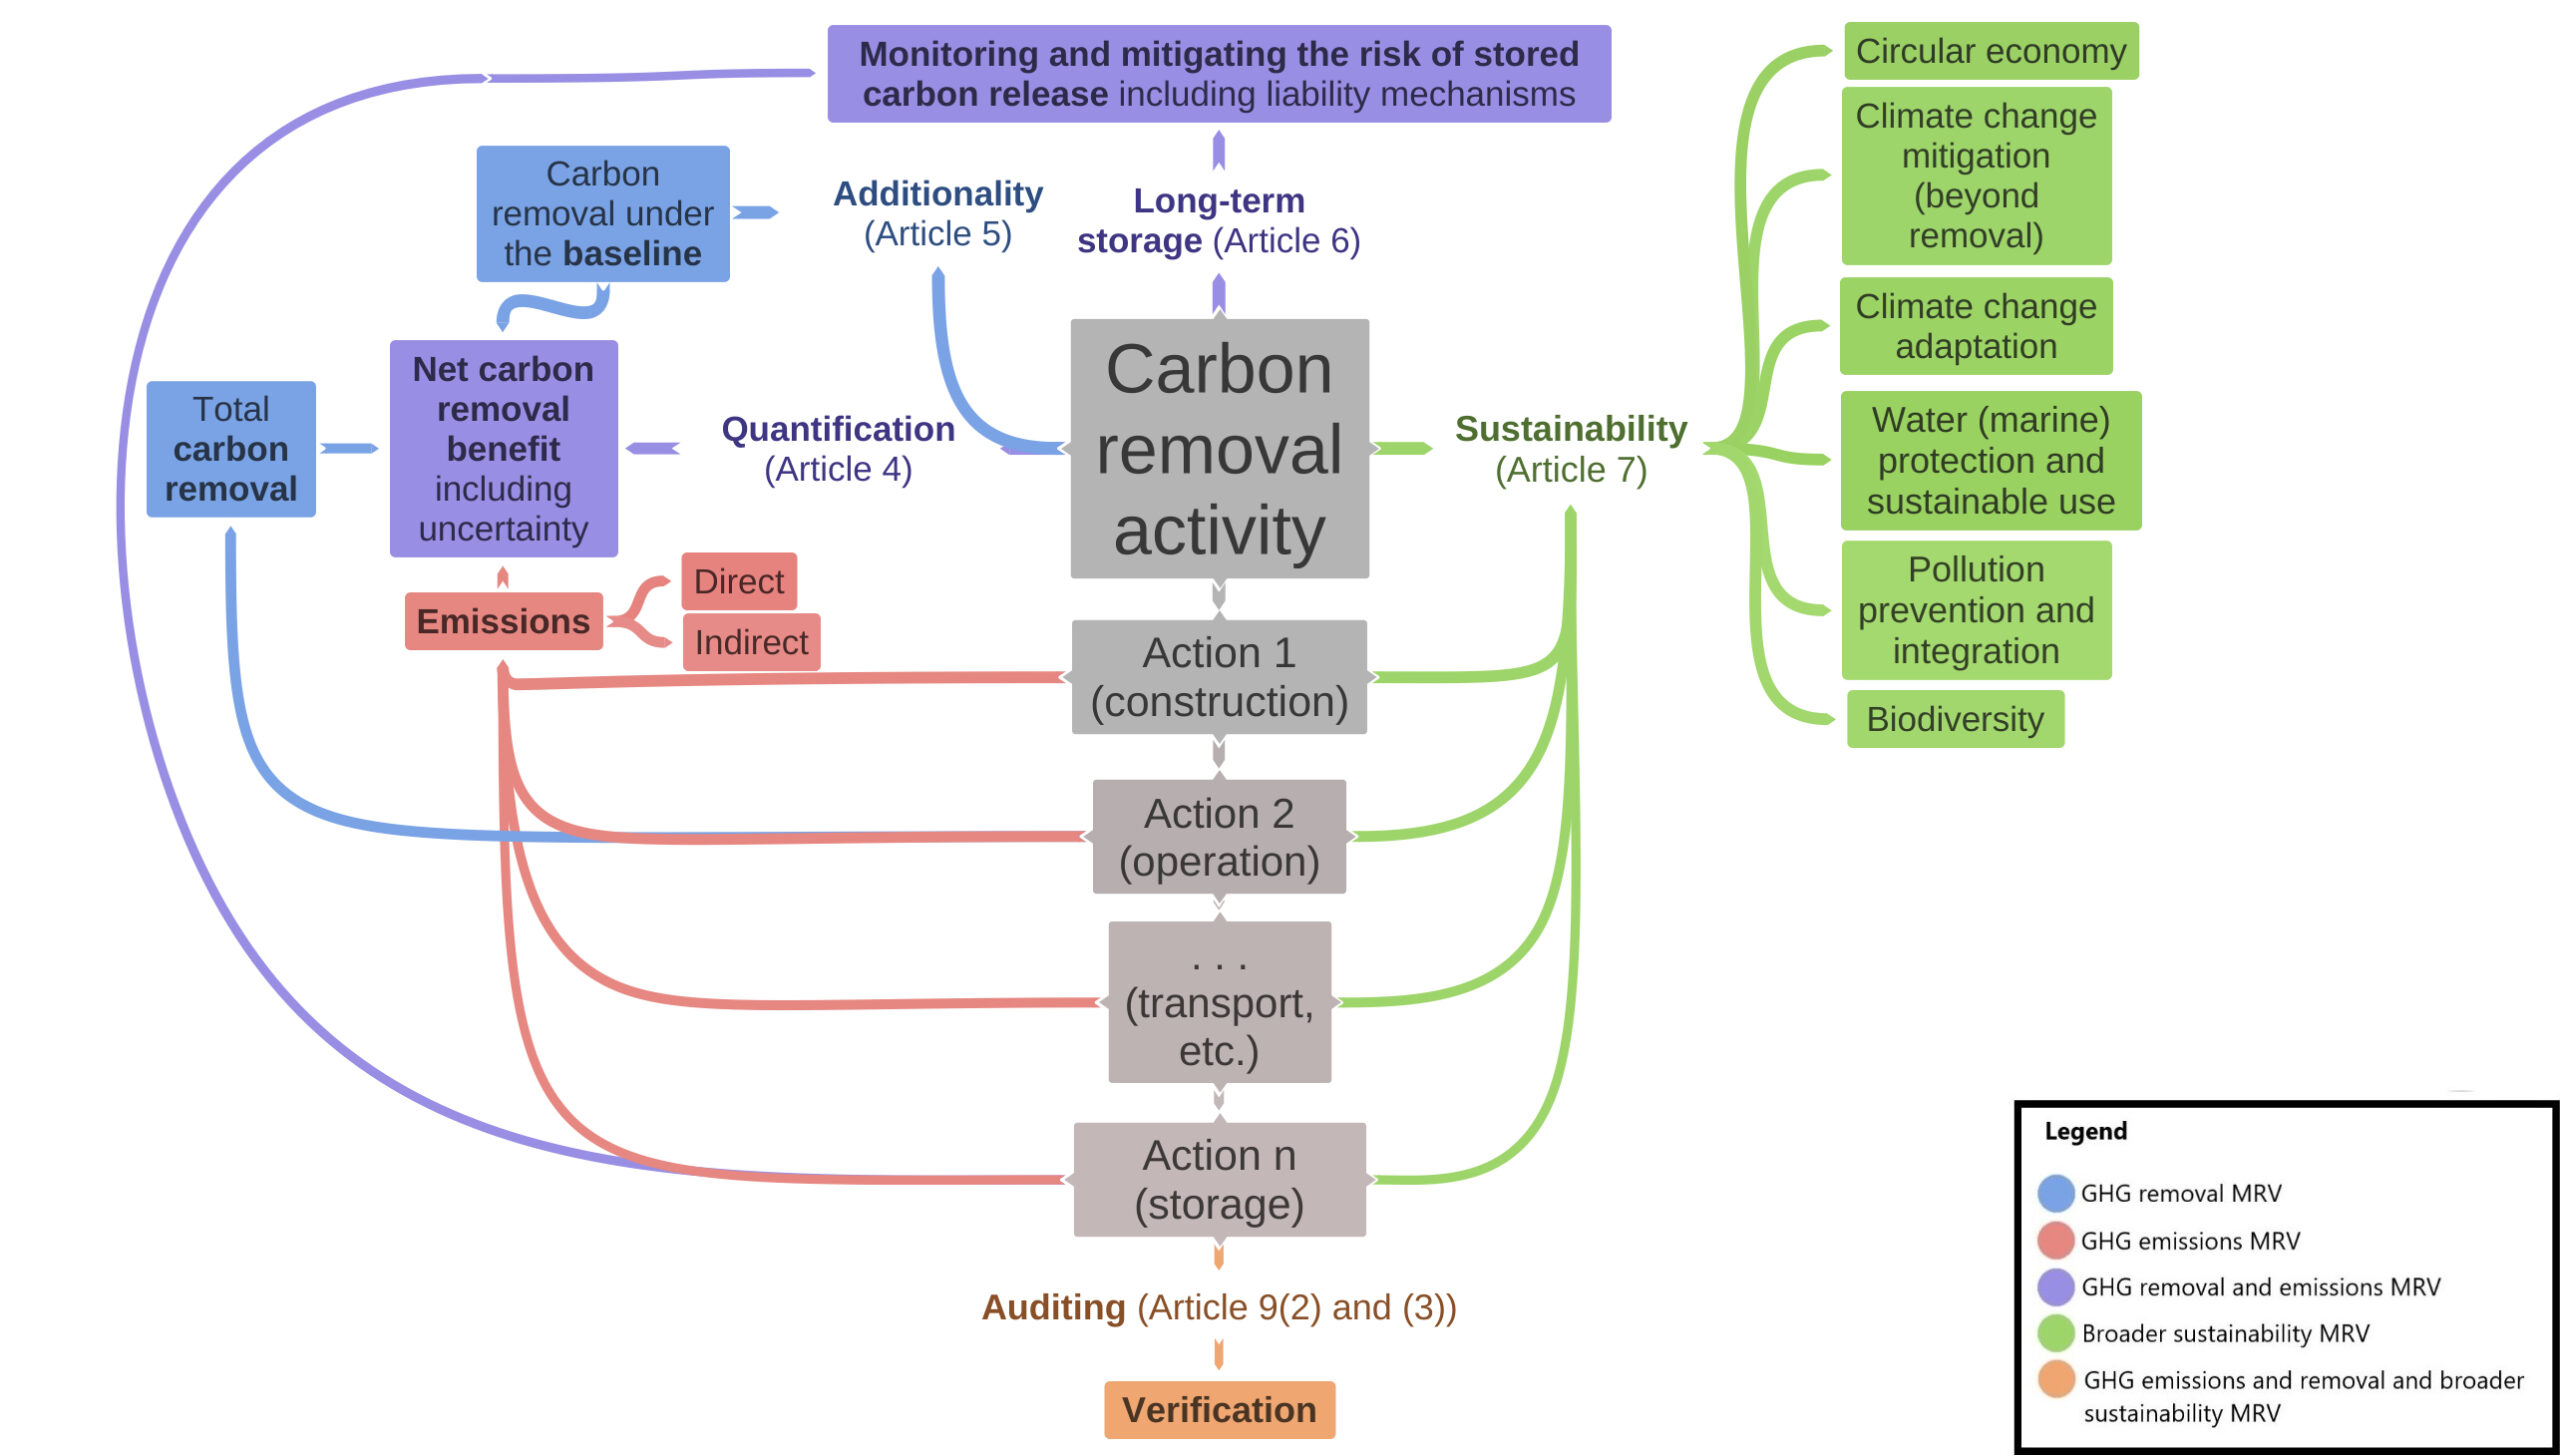 Figure 2 shows CDR MRV as proposed by the European Commission including the long term storage (Article 6) and monitoring and mitigating the risk of stored carbon release; quantification (article 4) of net carbon removal benefit; sustainability (article 7); auditing (article 9(2) and (3) including verification. 